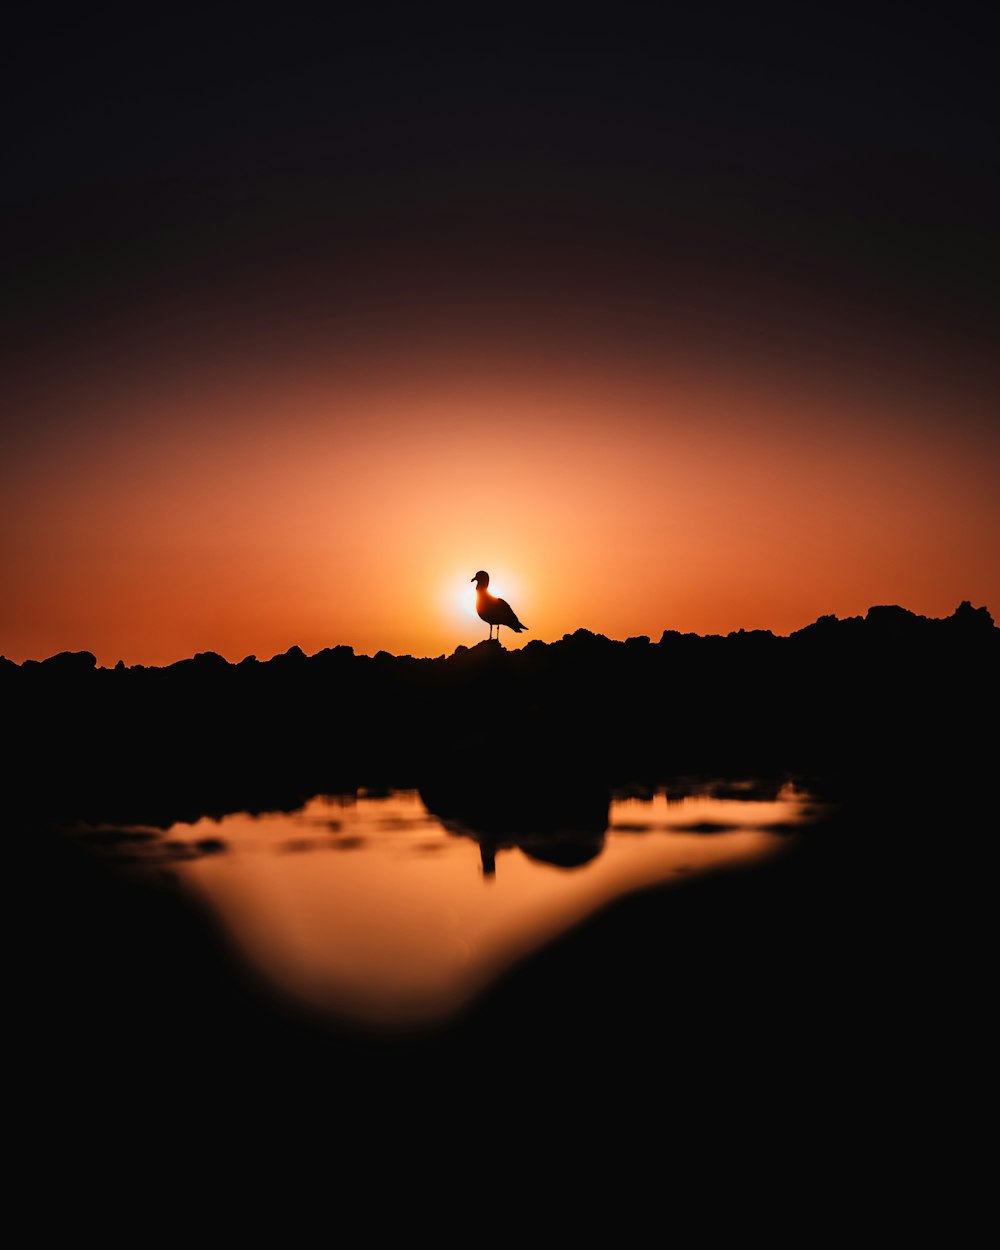 a bird is standing on a hill at sunset